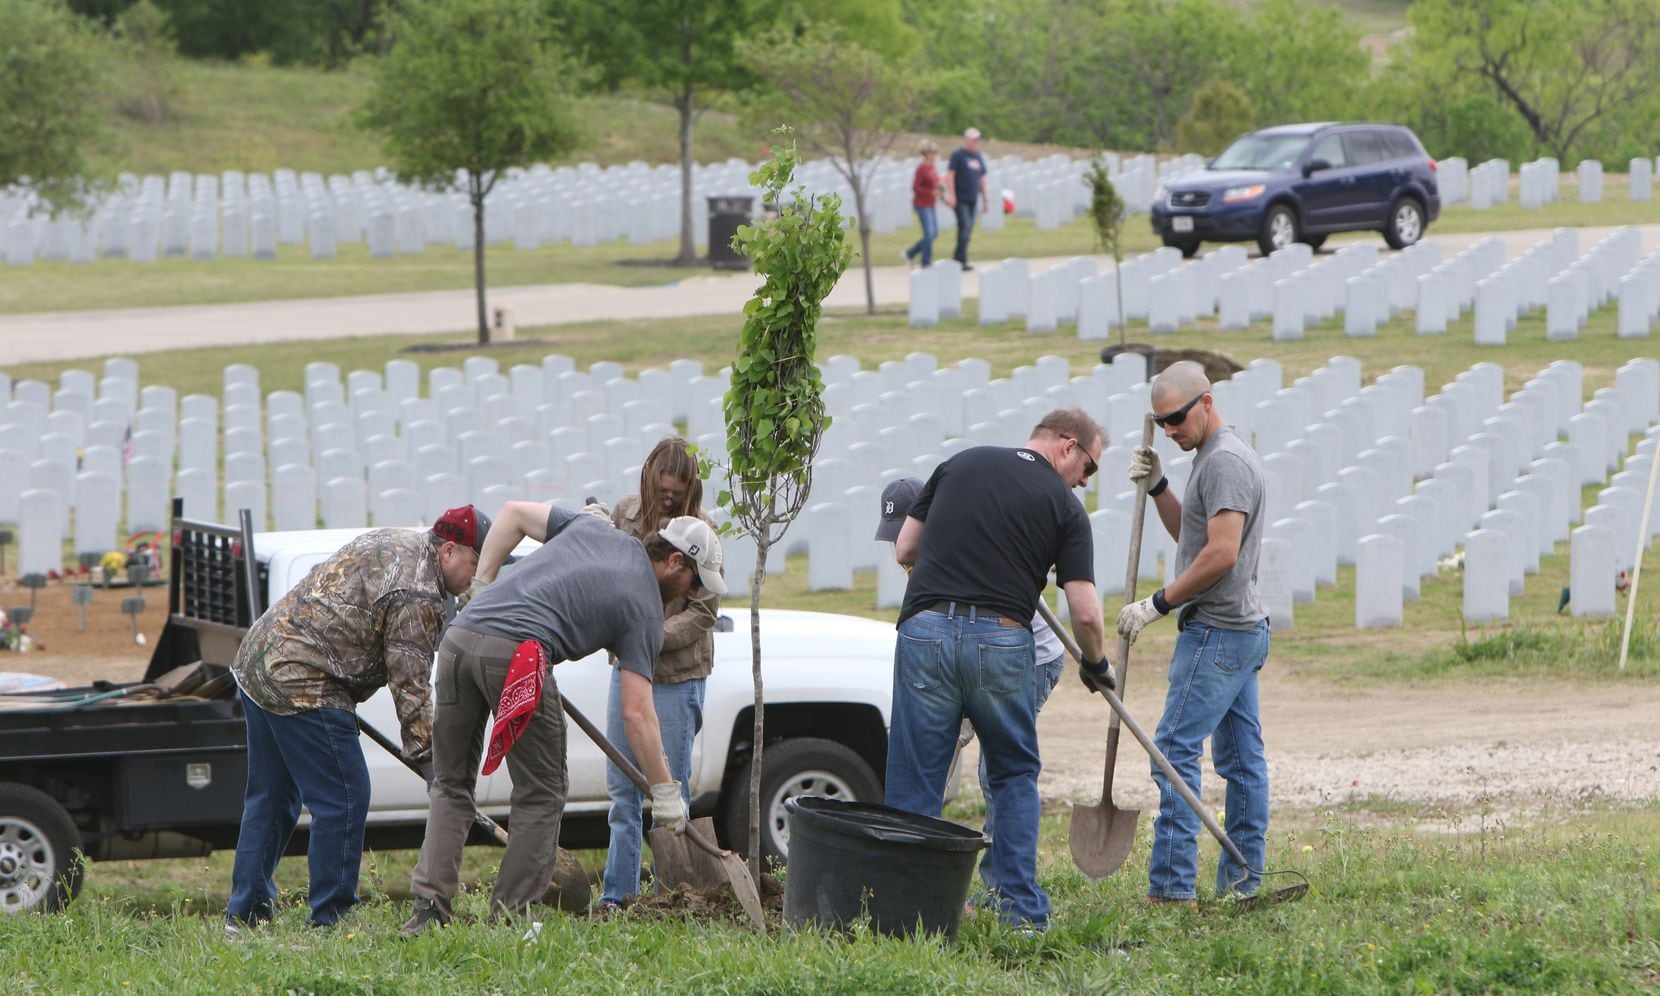 Volunteers work to plant a tree as part of a community growth program, which attracted volunteers from area organizations and companies to plant trees and clean grave markers. Texas Trees Foundation and TXU Energy sponsored the event, which was held at the DFW National Cemetery.